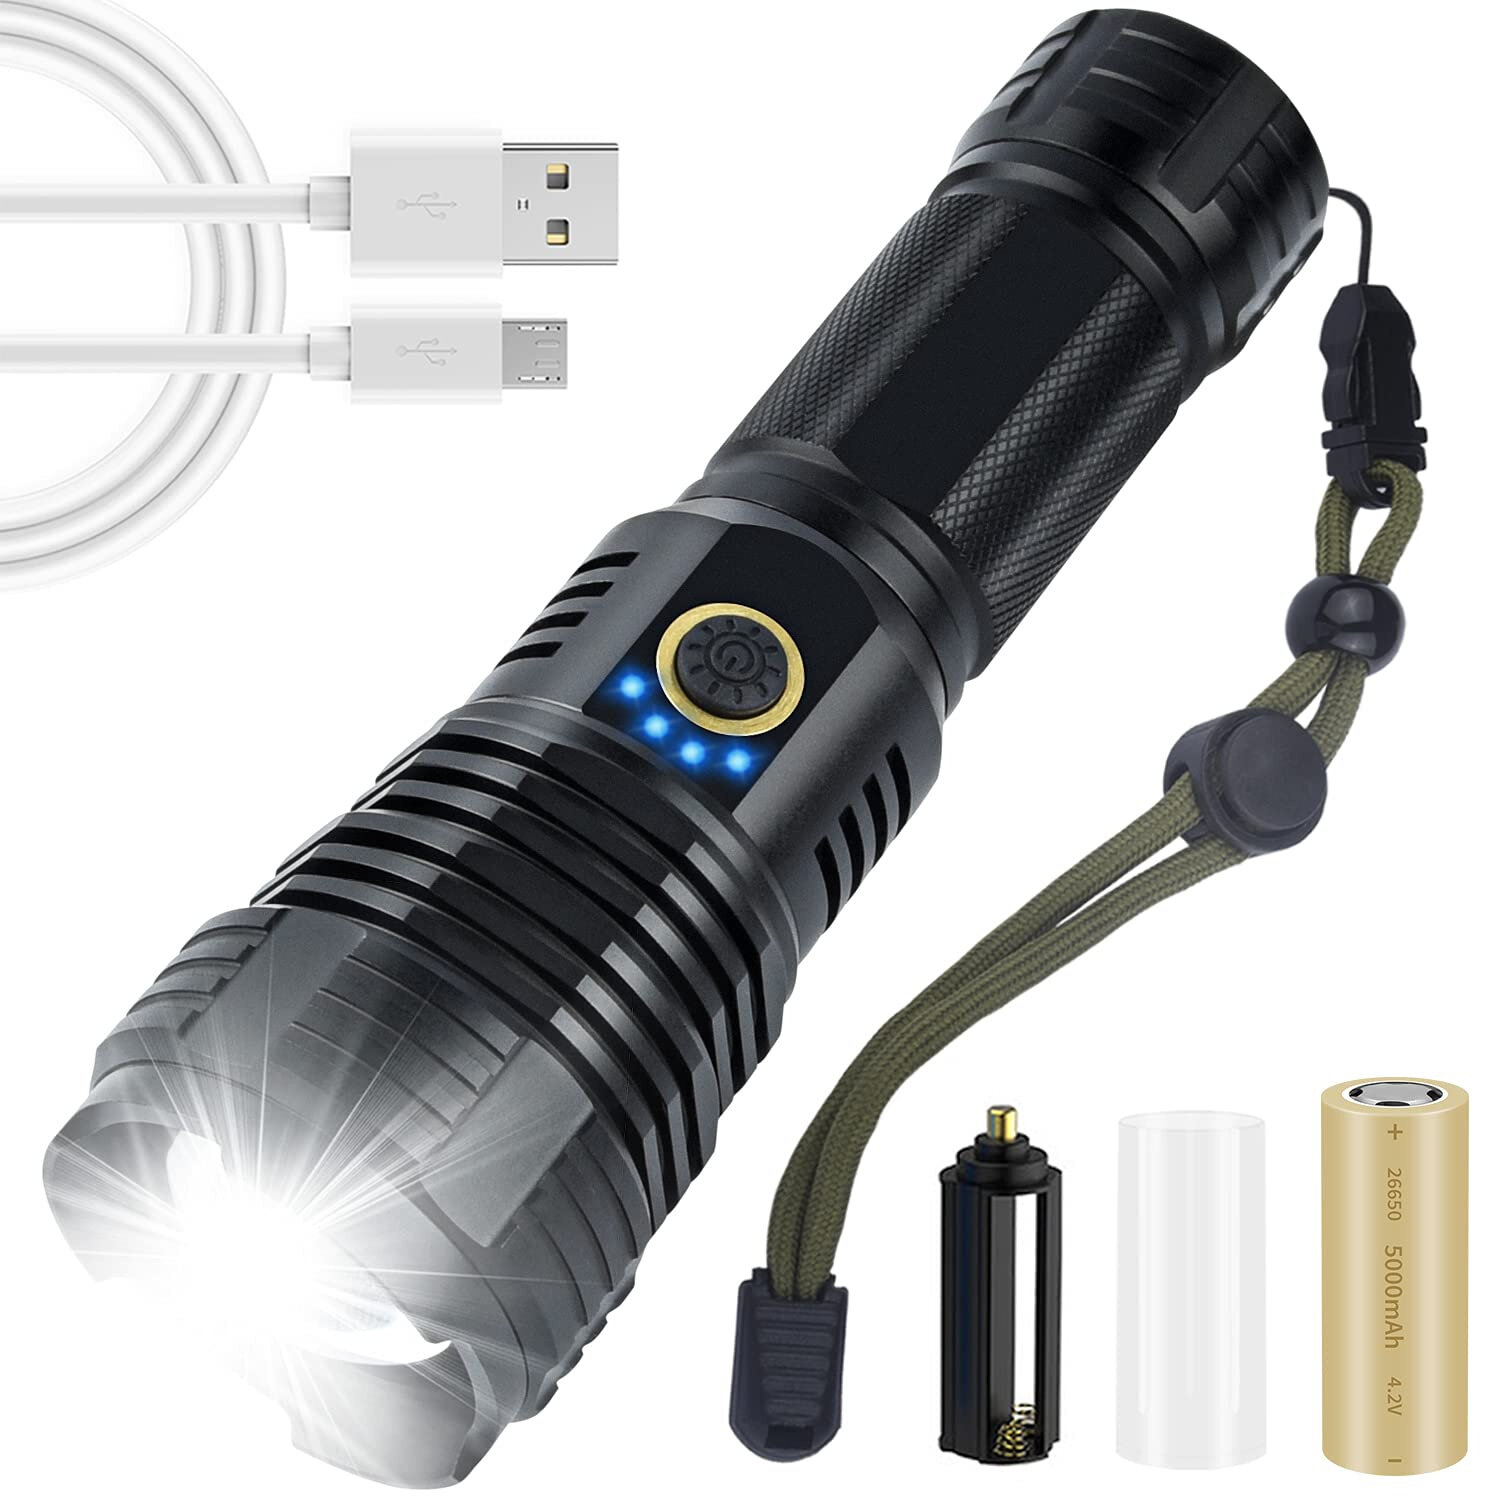 Adjustable Focus Flashlight 4 Modes Water-resistant Outdoor Camping Torch Light